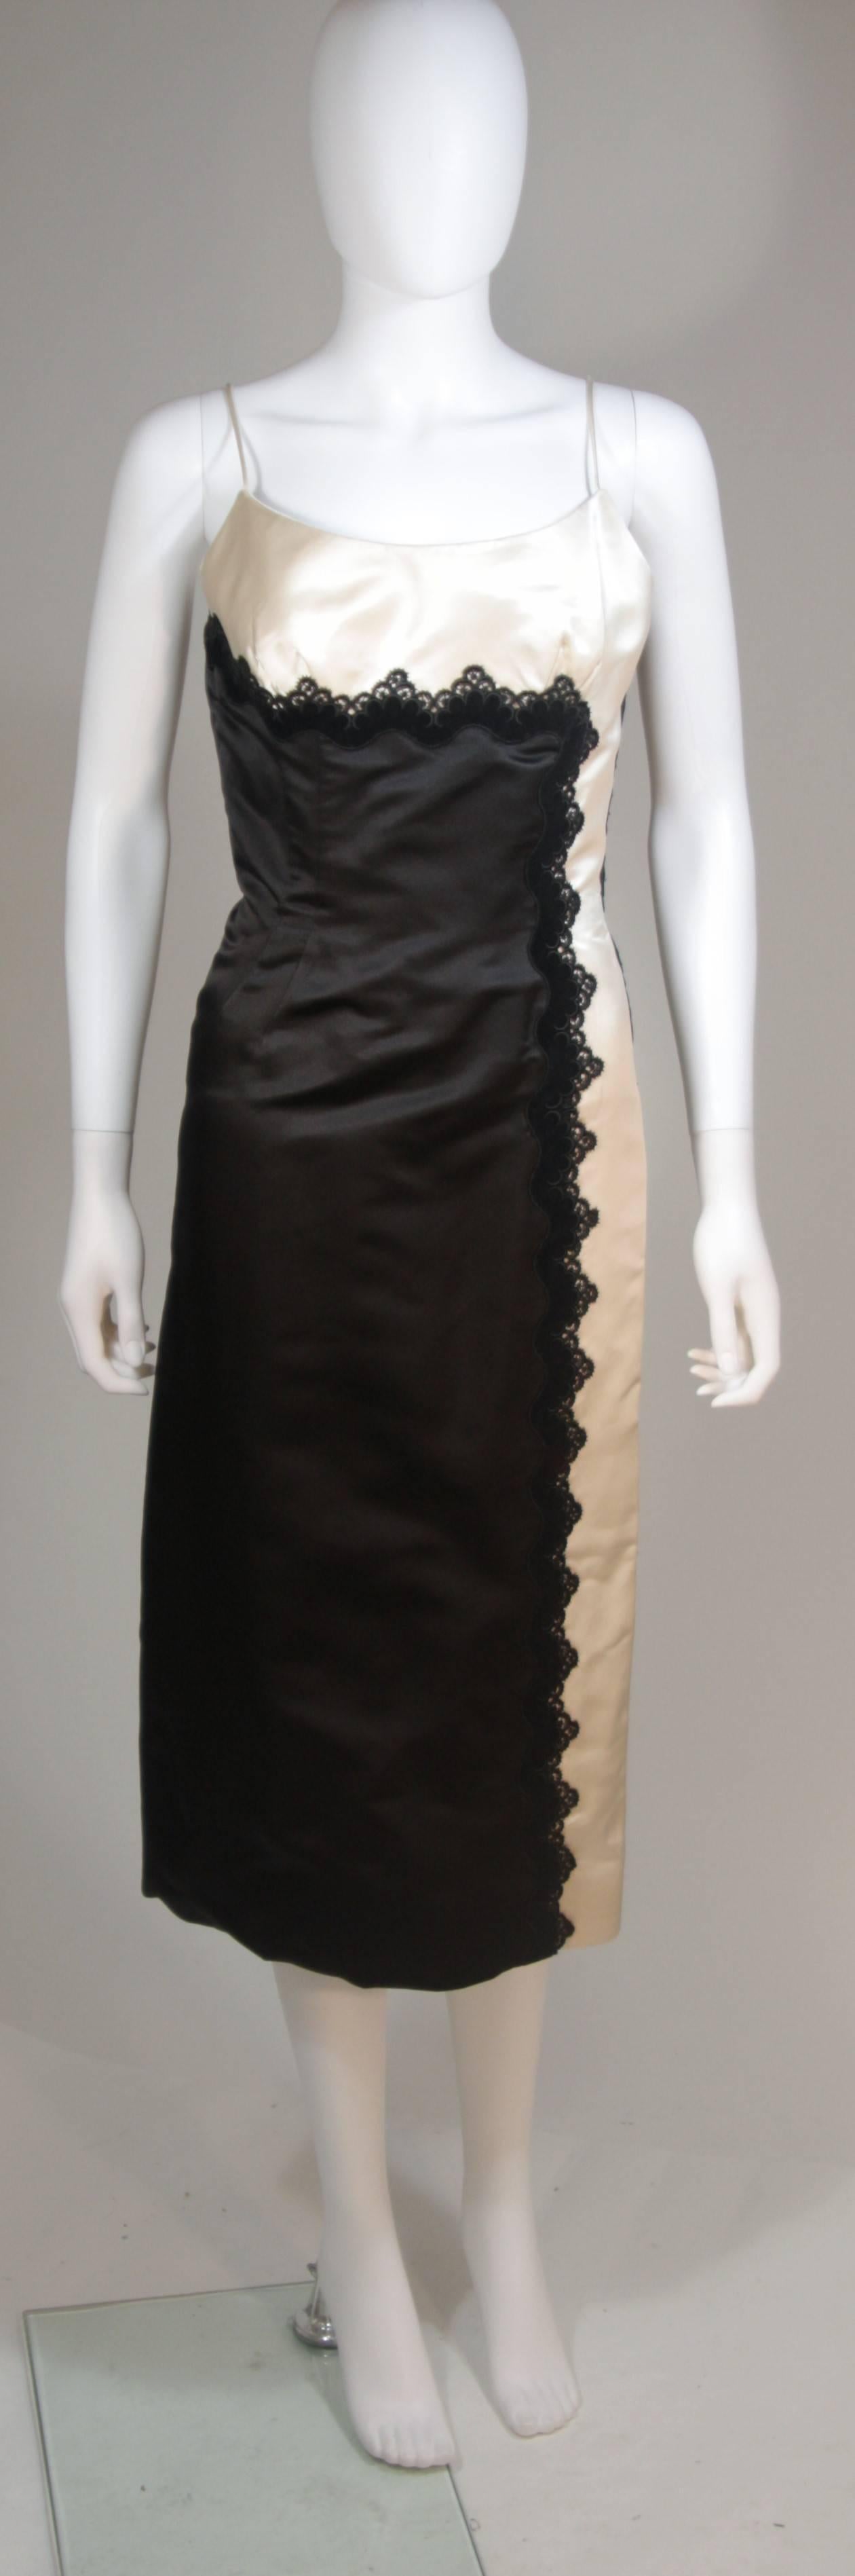  This Oleg Cassini  cocktail dress is composed of black and off-white silk with lace applique. There is a center back zipper closure. and spaghetti strap. In excellent vintage condition. 

  **Please cross-reference measurements for personal